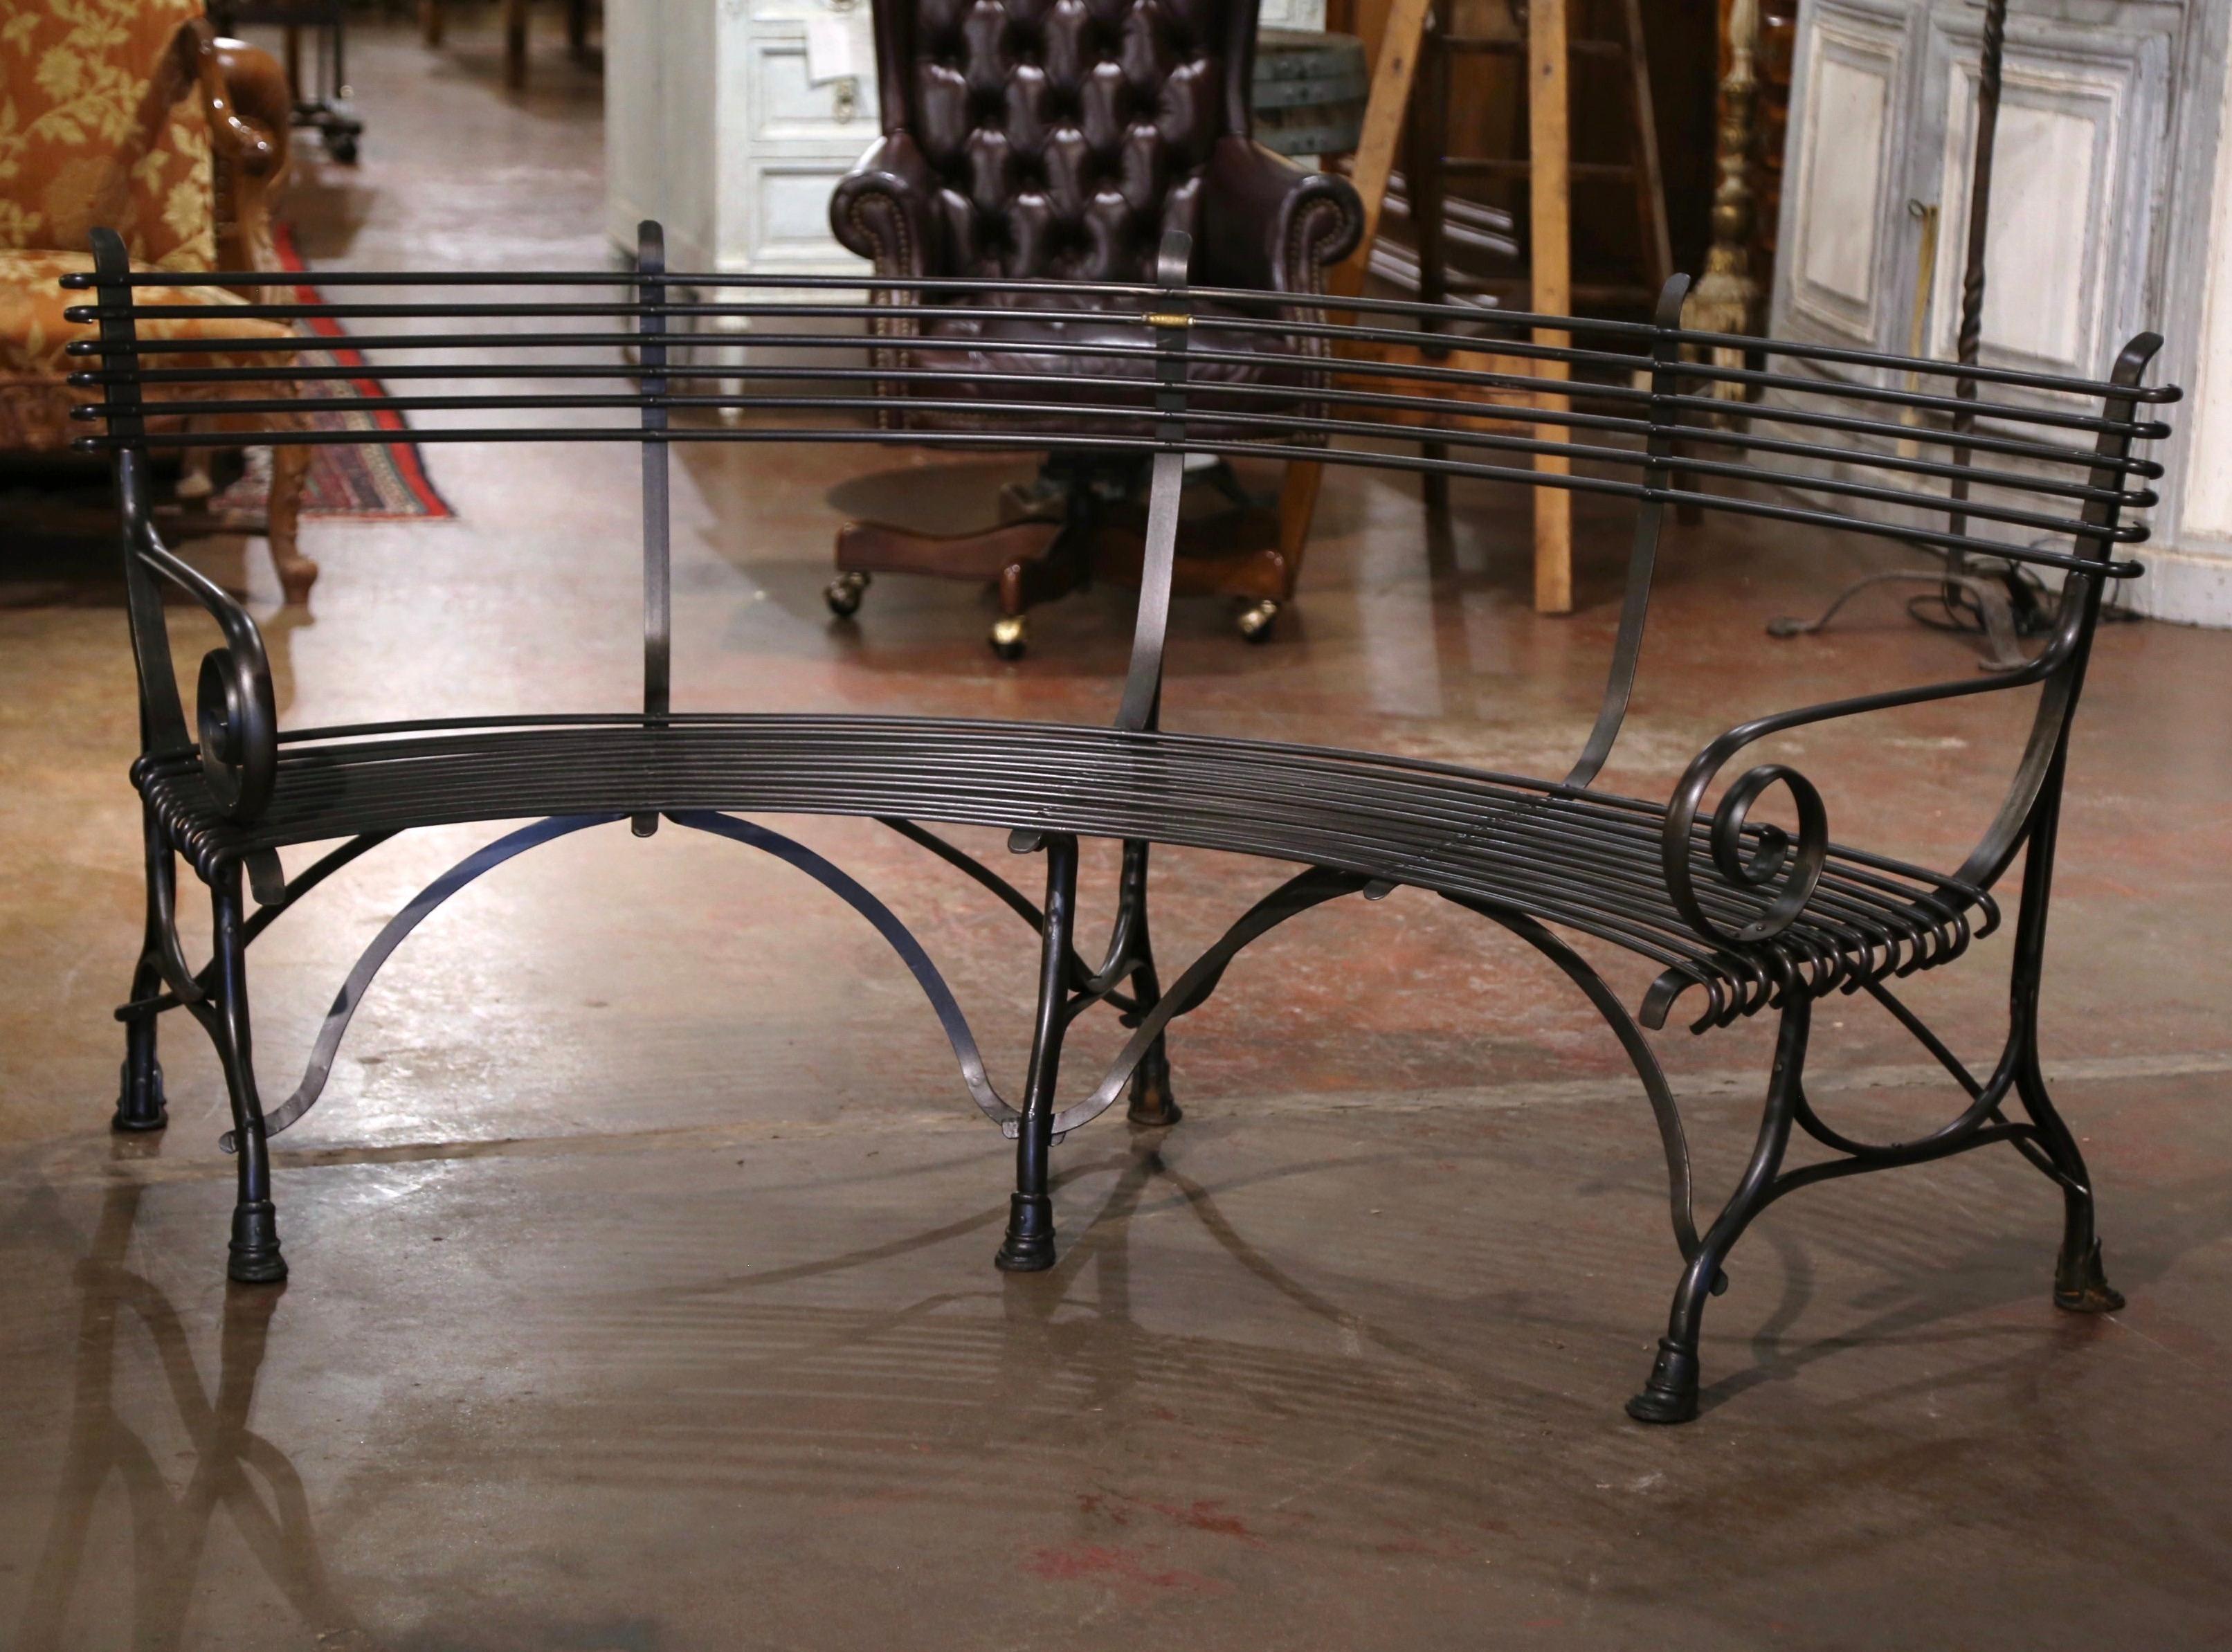 Crafted in France, this elegant forged iron curved bench stands on six legs ending with hoof feet and connected with stretchers at the base. The seating has gracious lines, scrolled armrests, and a curved back; the comfortable four-seat bench is